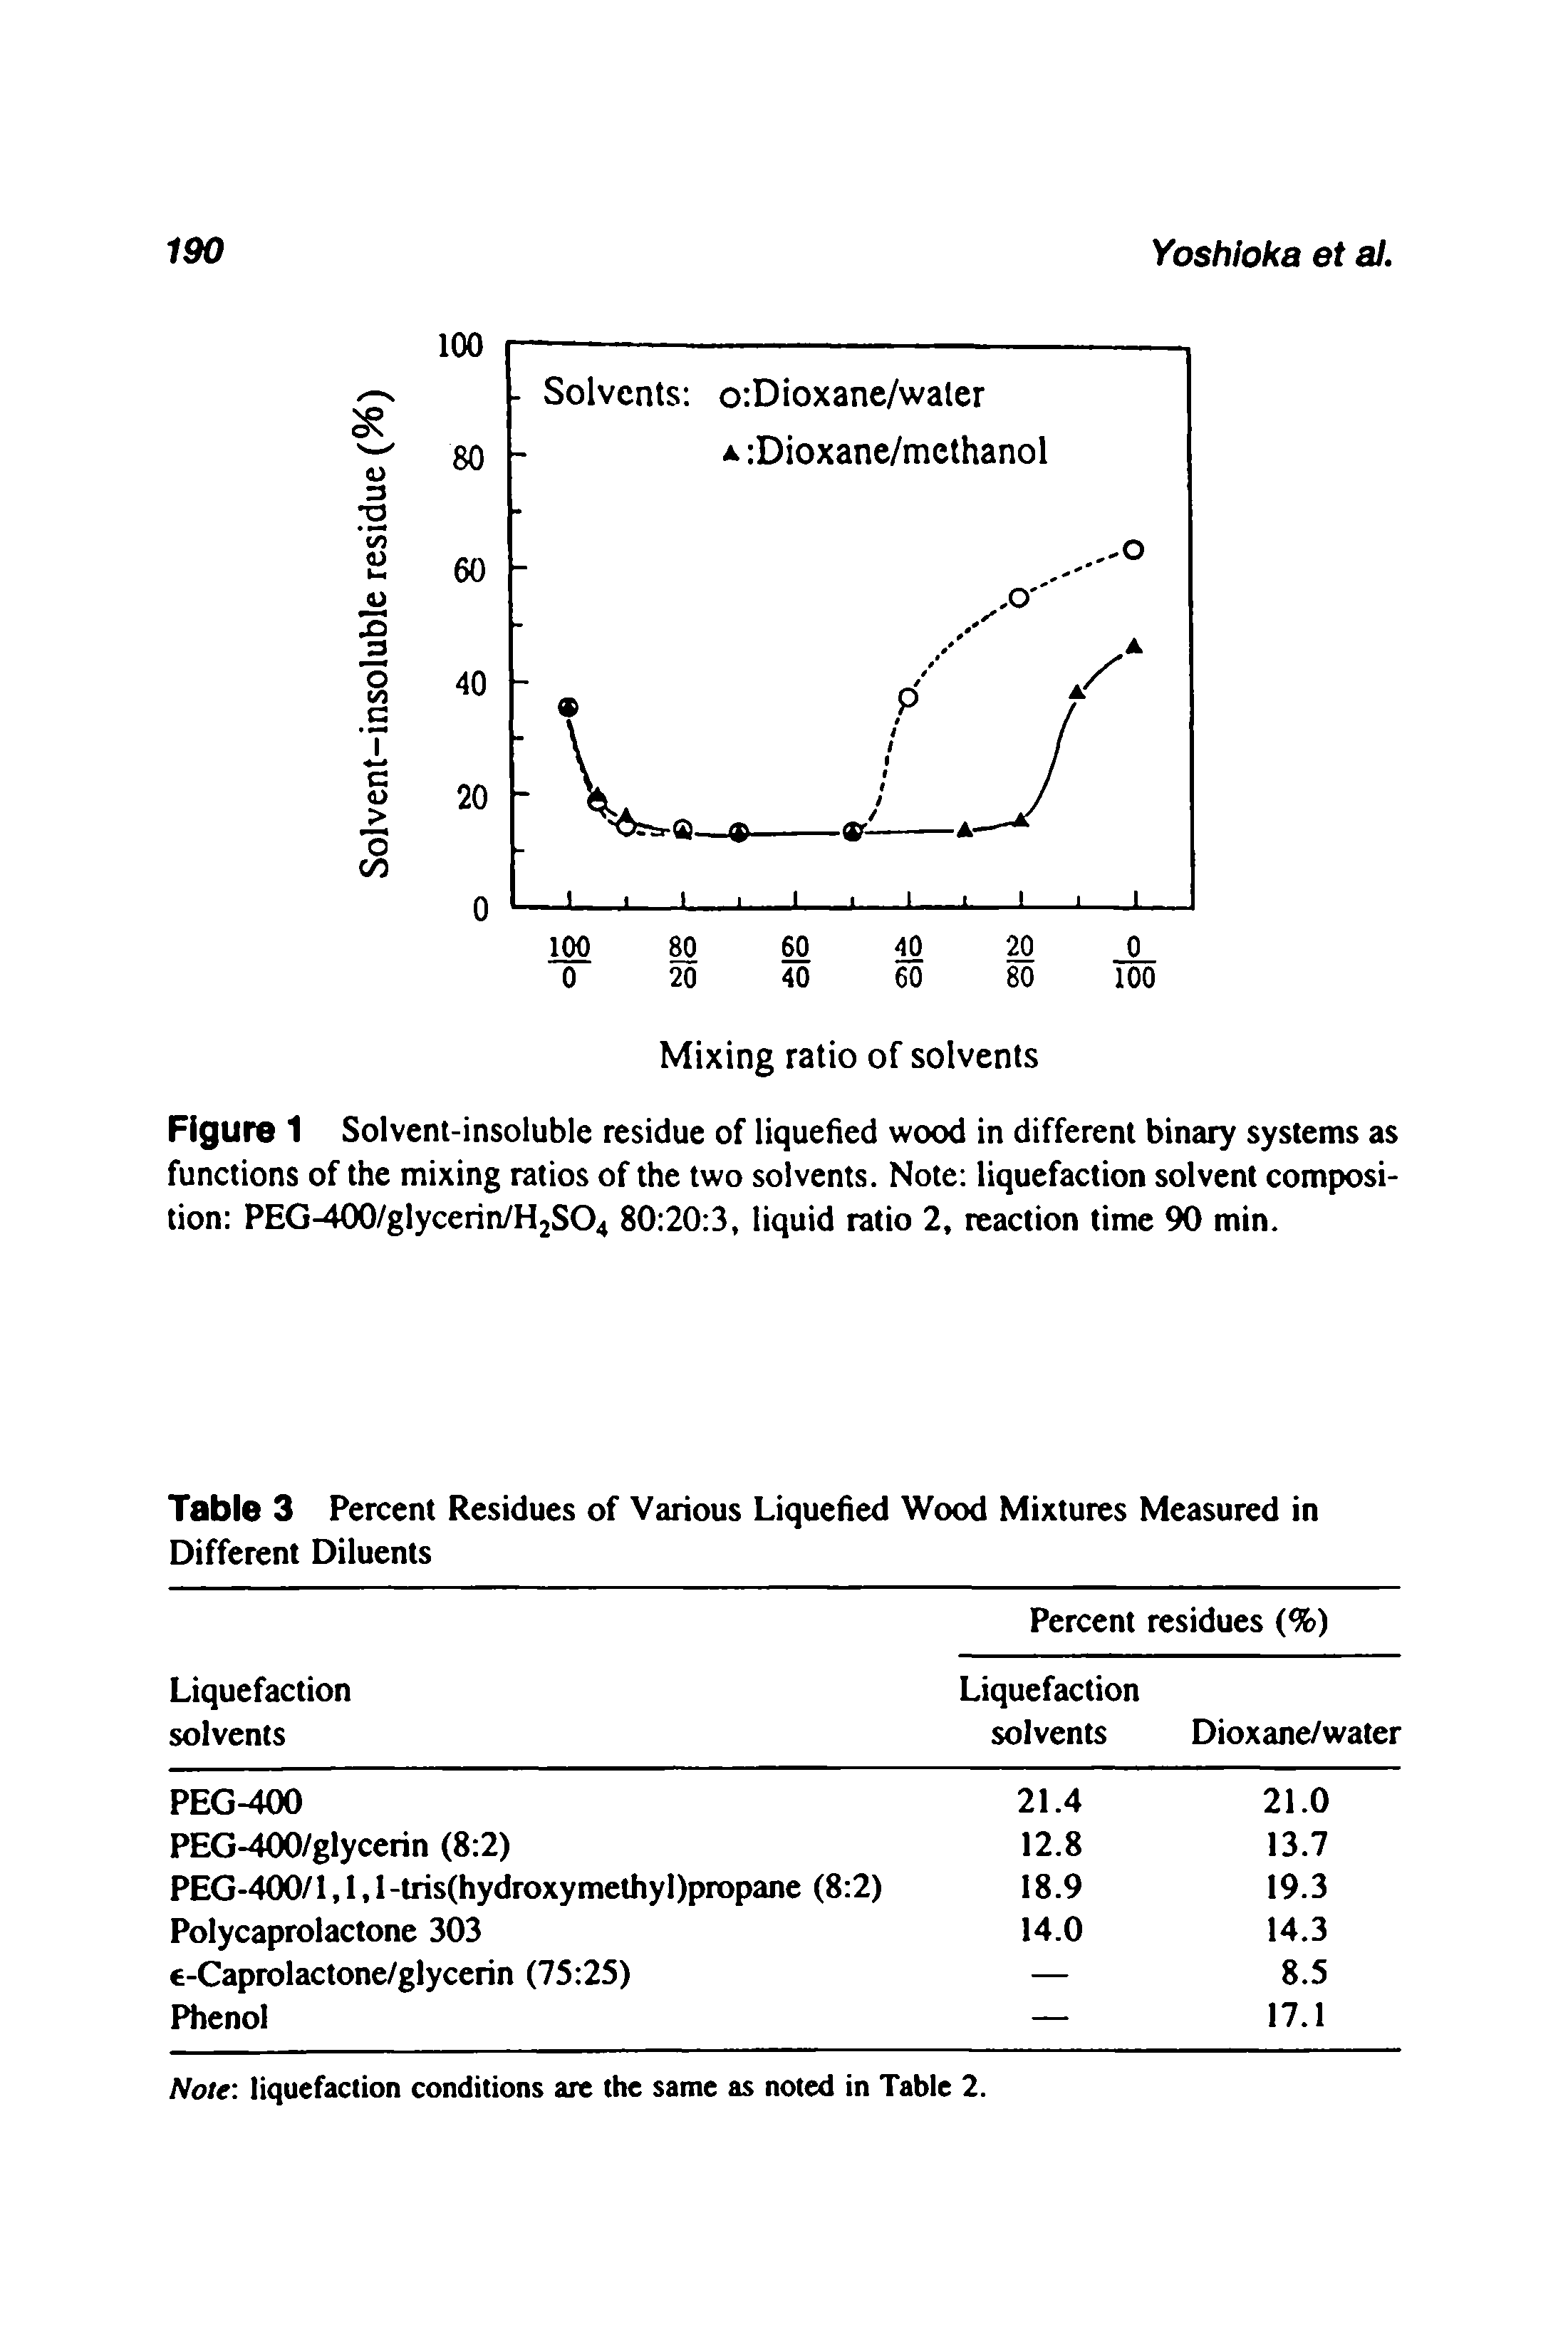 Figure 1 Solvent-insoluble residue of liquefied wood in different binary systems as functions of the mixing ratios of the two solvents. Note liquefaction solvent composition PEG-400/glycerin/H2S04 80 20 3, liquid ratio 2, reaction time 90 min.